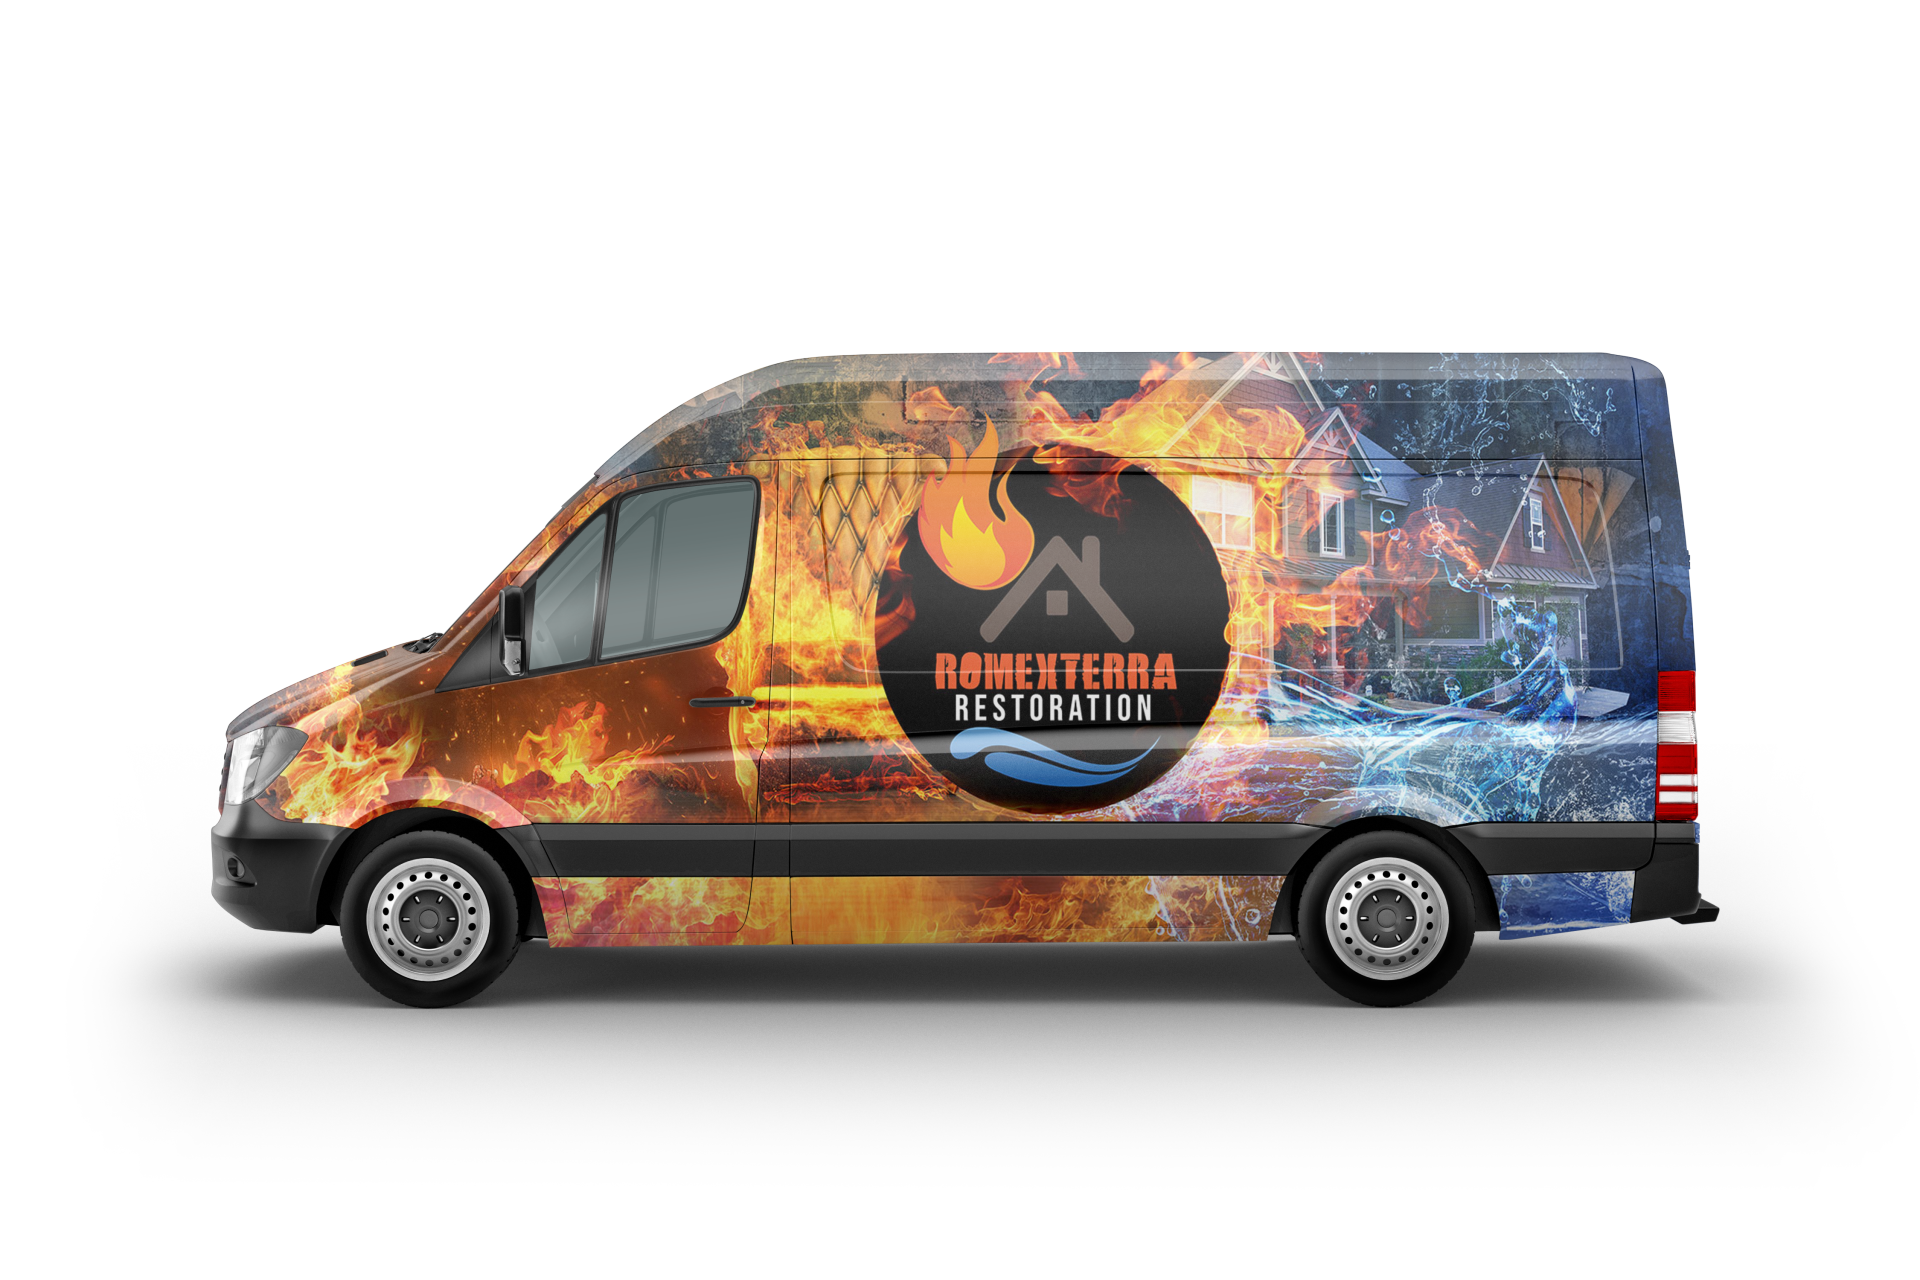 Romexterra Restoration Service Vehicle for Mold Removal